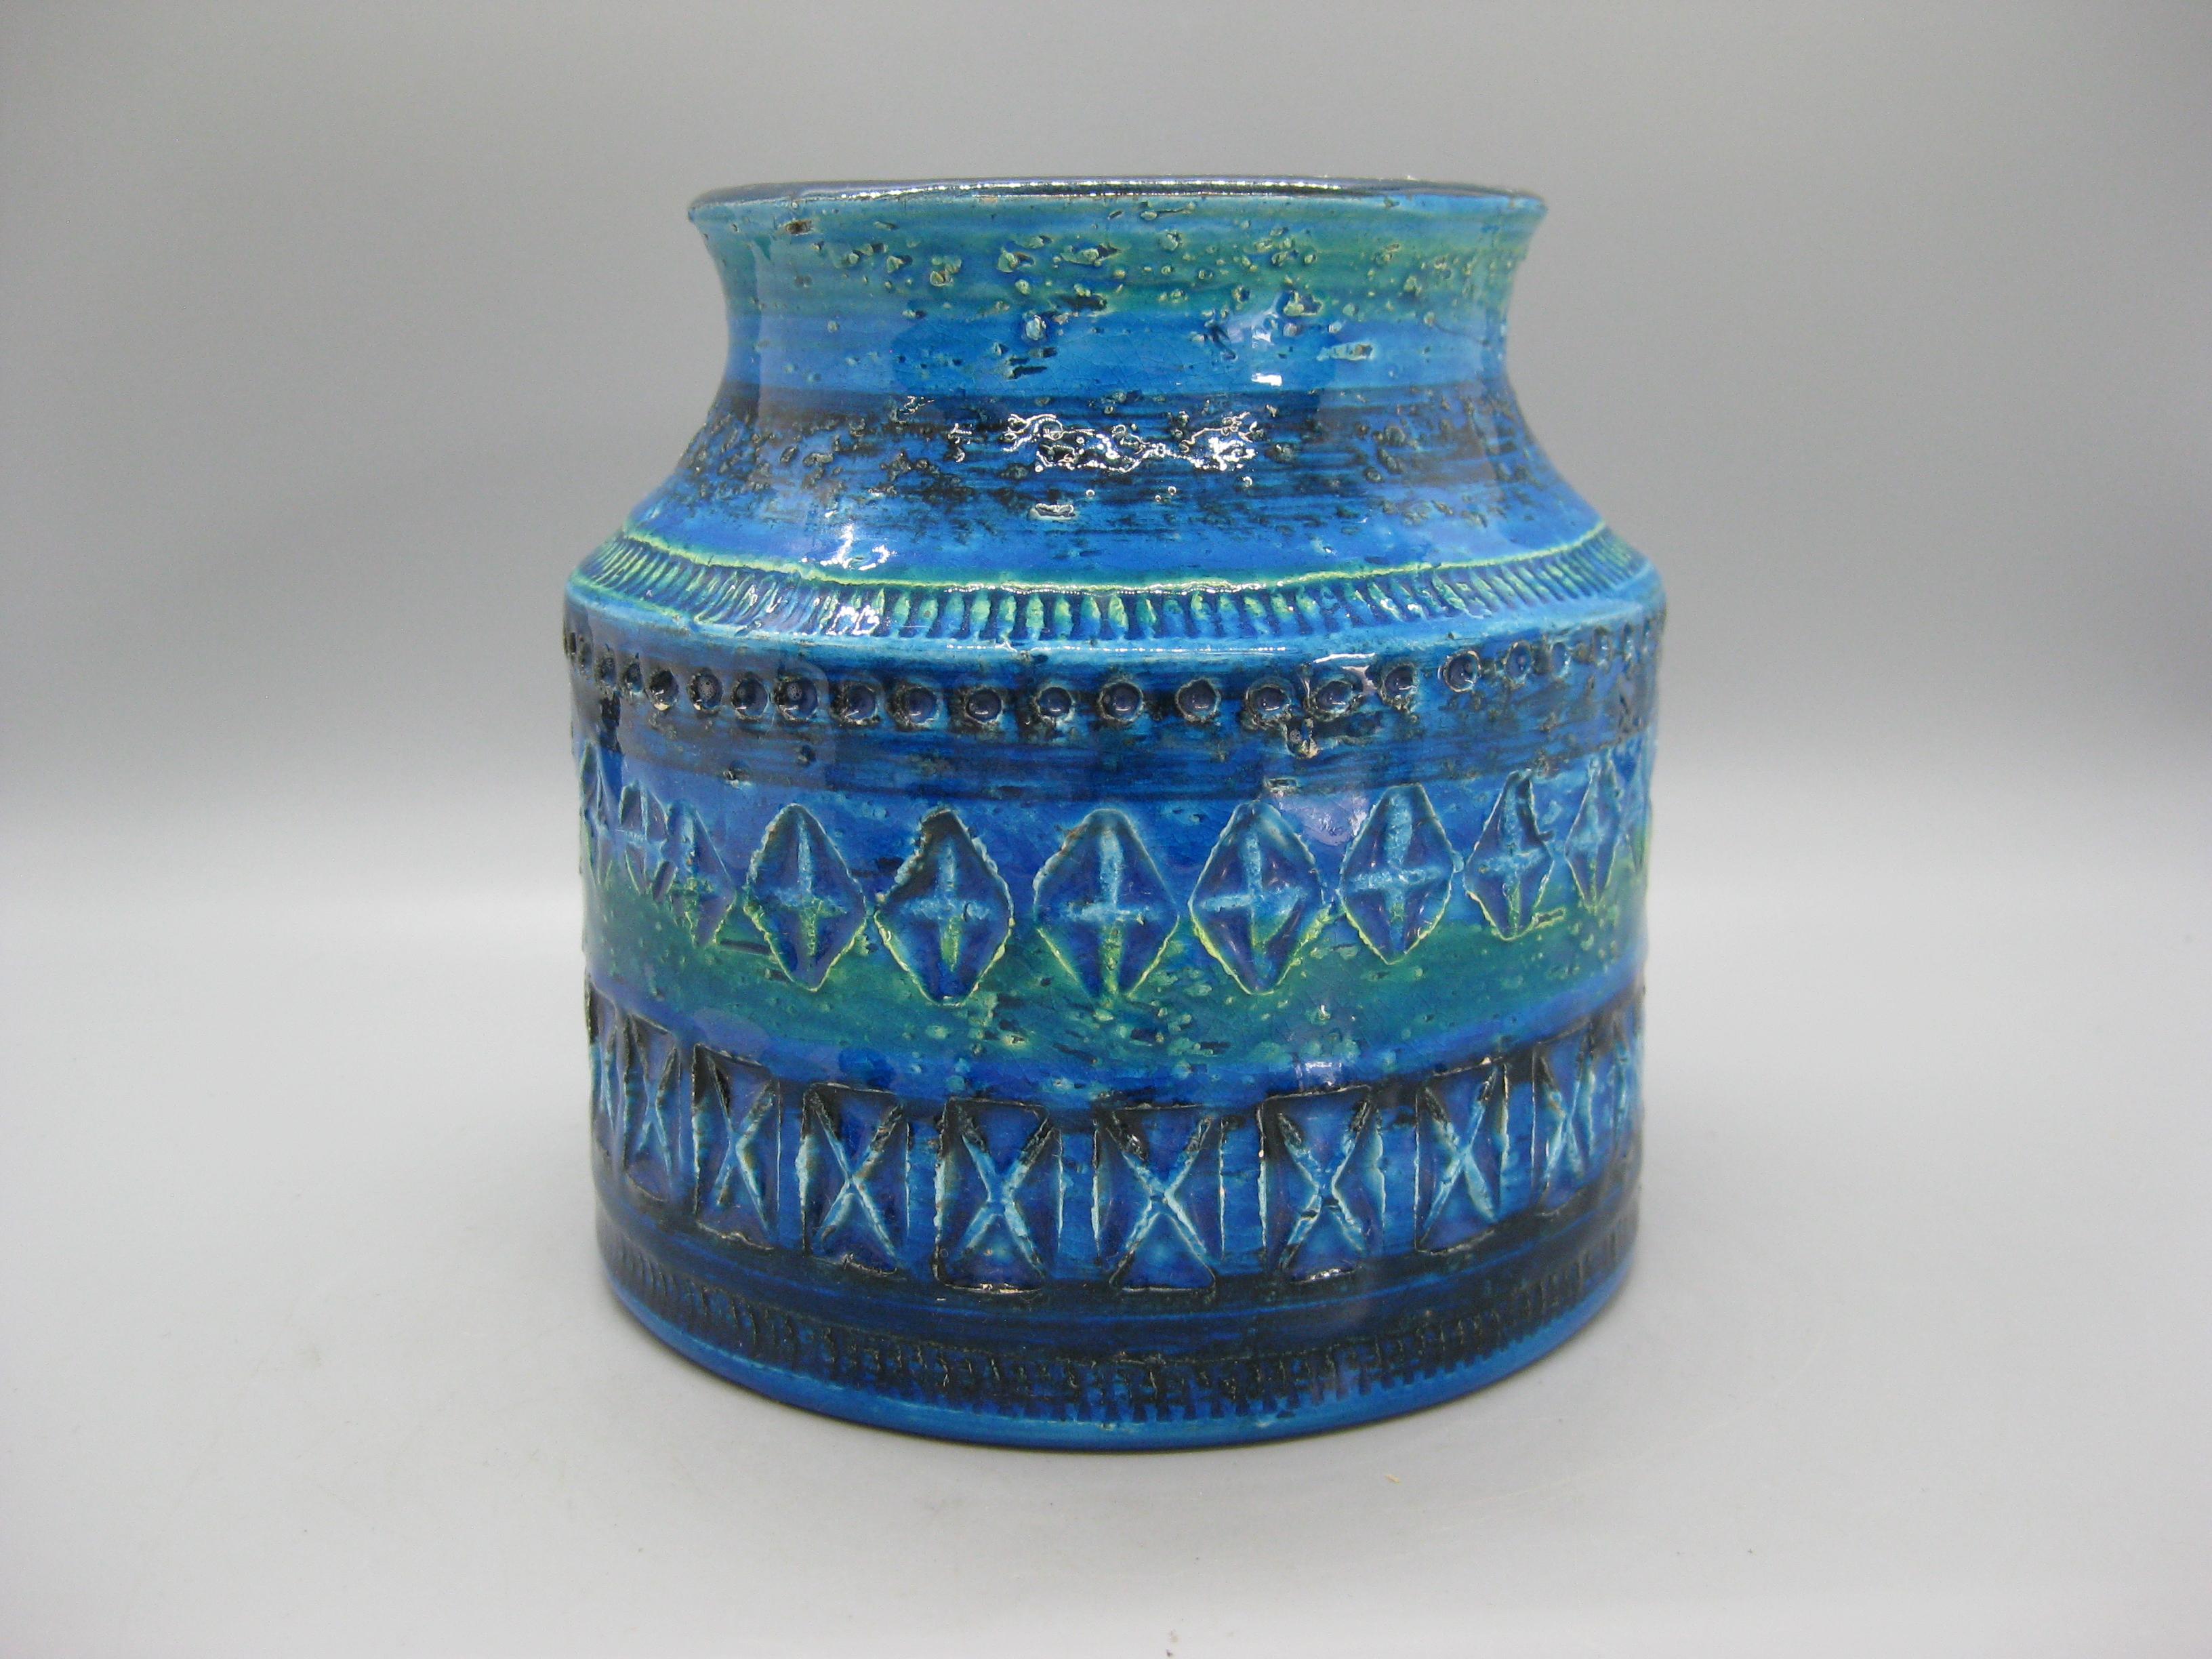 Wonderful vintage Aldo Londi Bitossi ceramic/pottery Rimini blue vase, circa 1960s. Made in Italy and is signed on the bottom. Appears to have never been used. Great abstract form and design. Wonderful hand painted colors and designs. In excellent